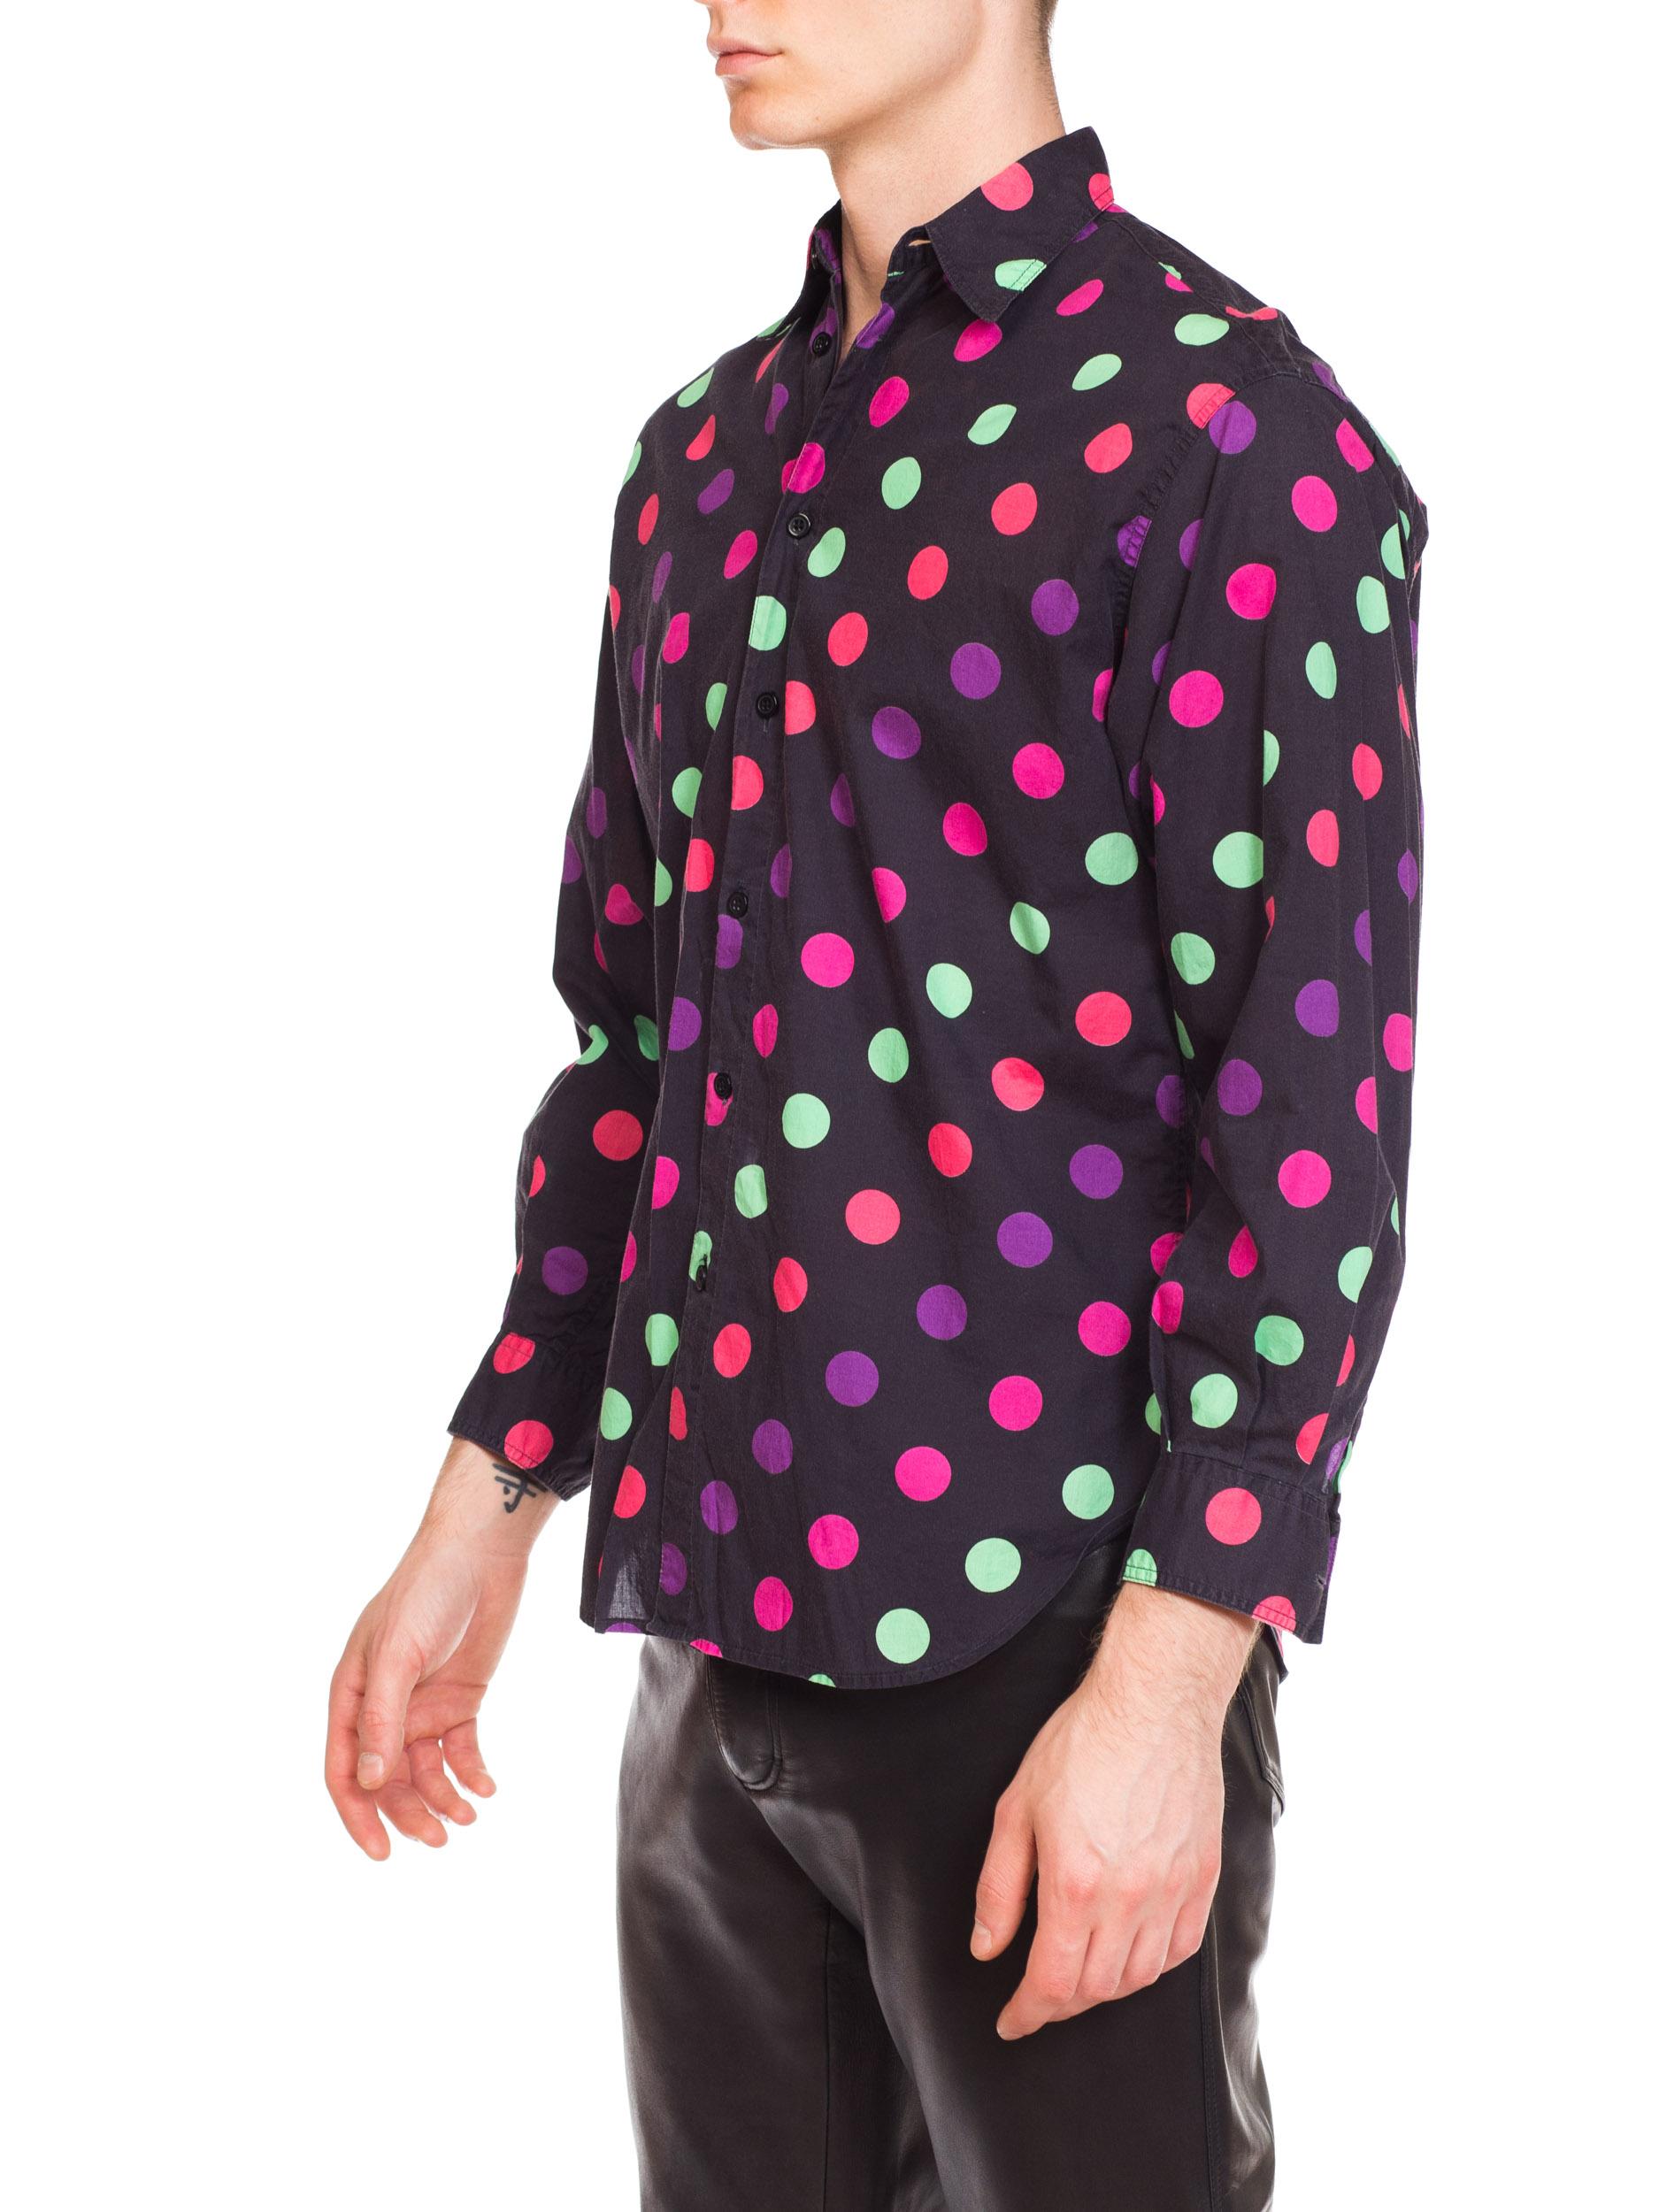 1990S VERSUS BY GIANNI VERSACE Cotton Men's Neon Polka Dot Shirt Sz 44 In Excellent Condition In New York, NY